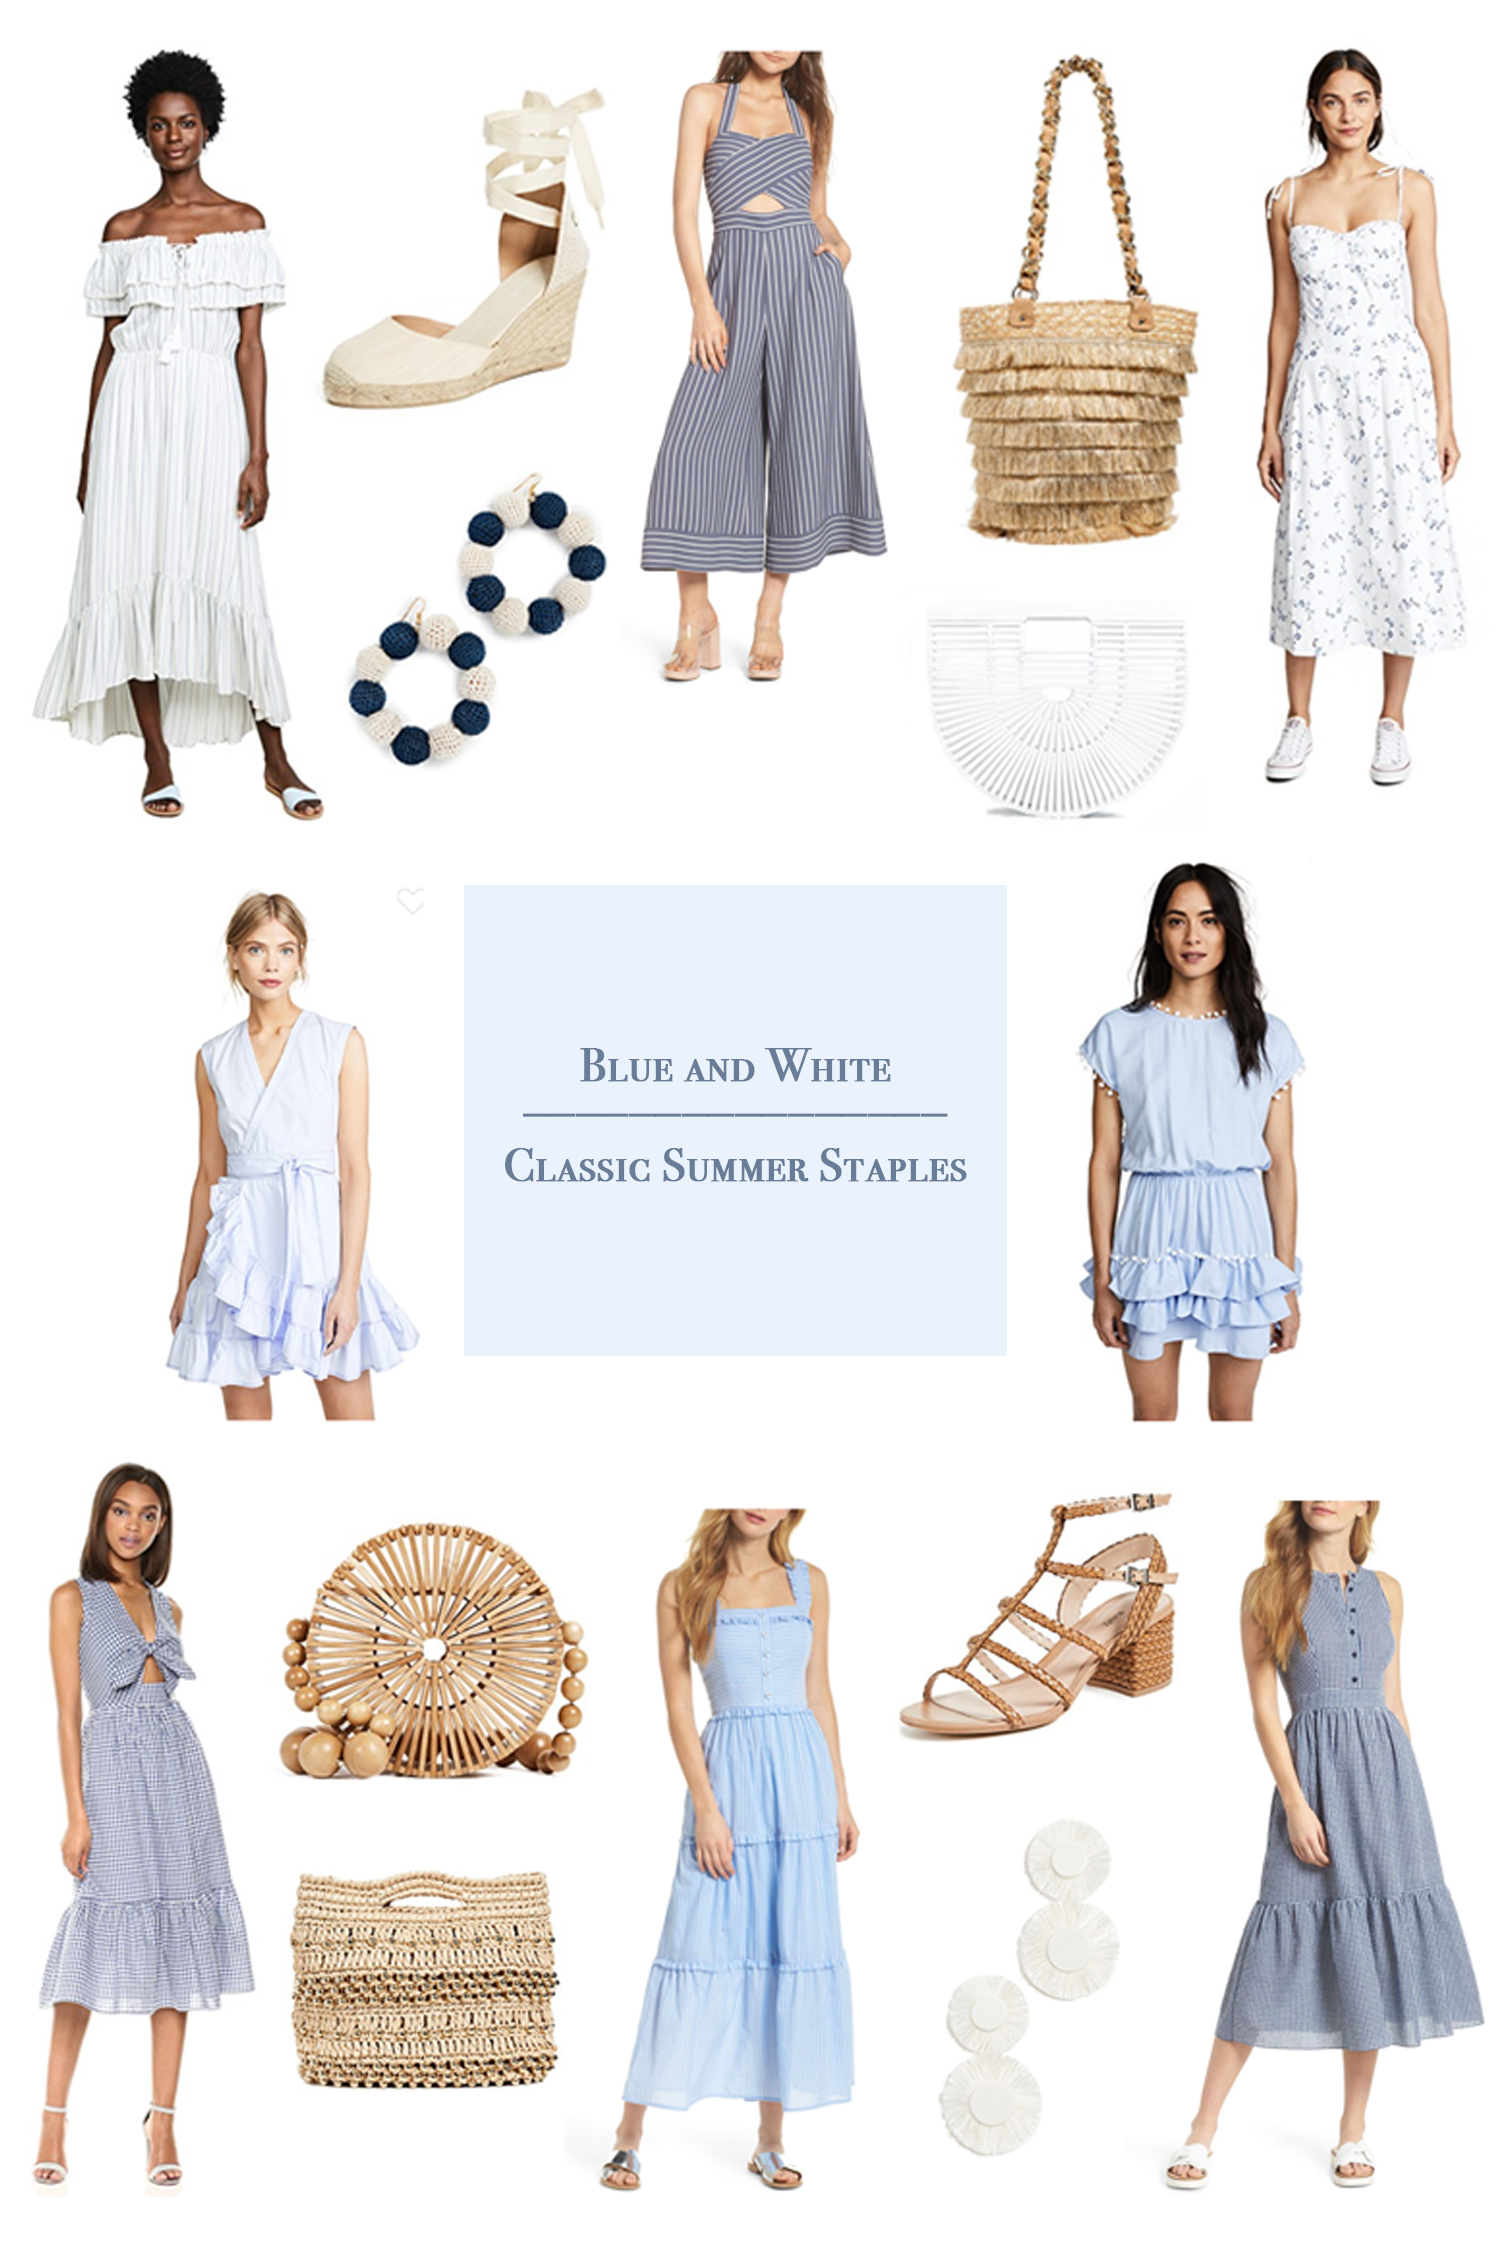 blue and white dresses, bags and shoes for summertime